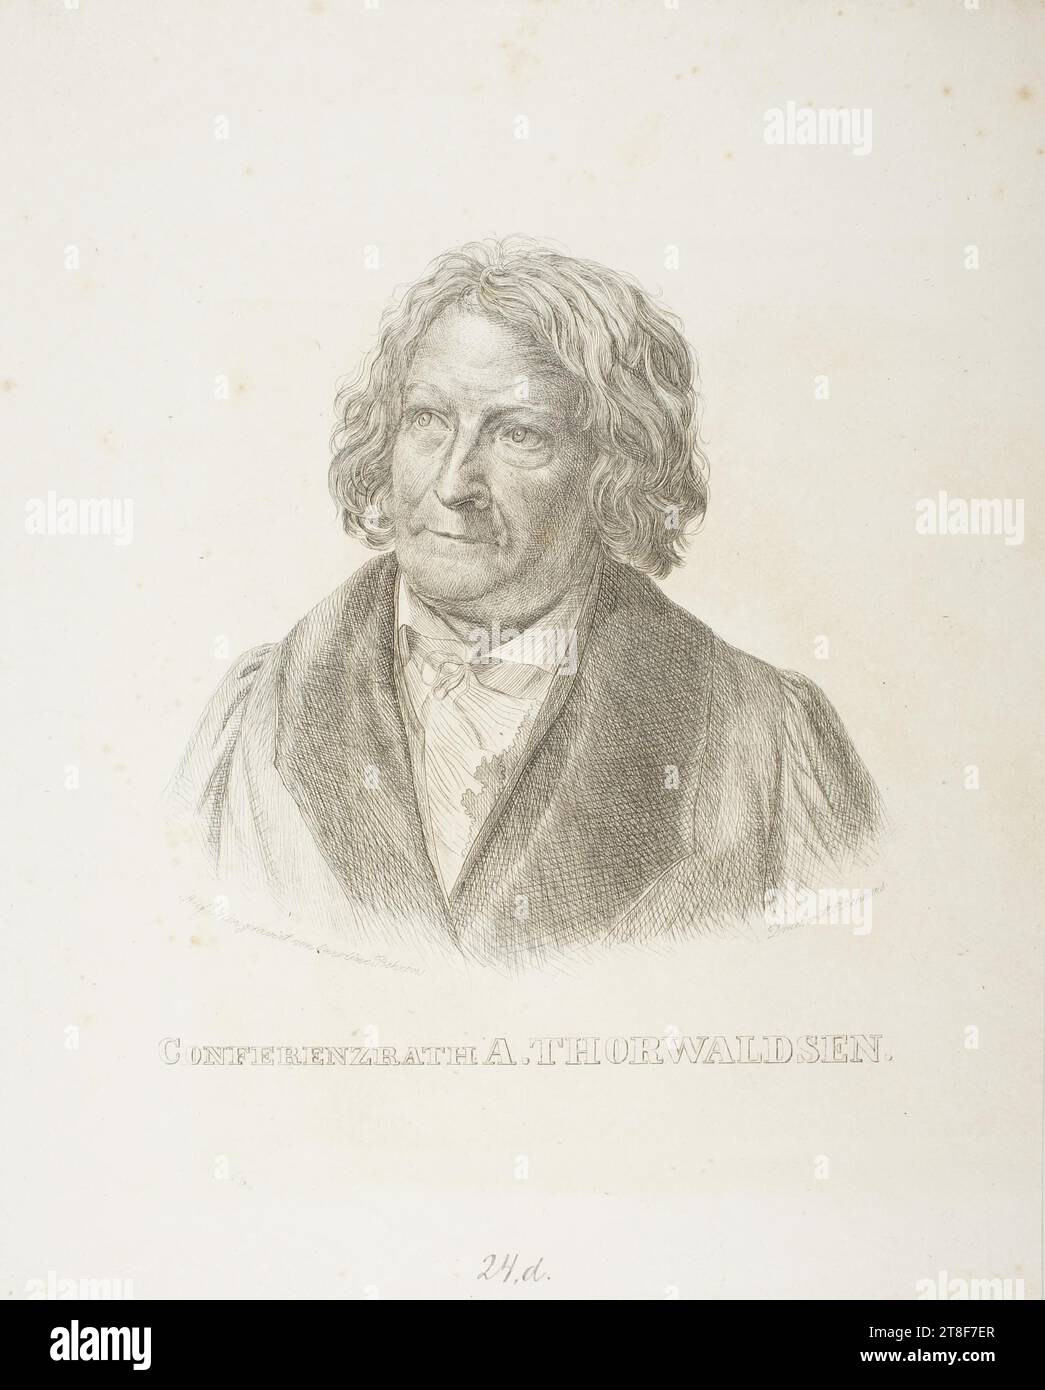 Portrait of Thorvaldsen, No earlier than 1836, Graphic Art, Engraving, Height (paper size) 270 mm, Width (paper size) 212 mm, Graphic Design, European, Modernity (1800 - 1914 Stock Photo